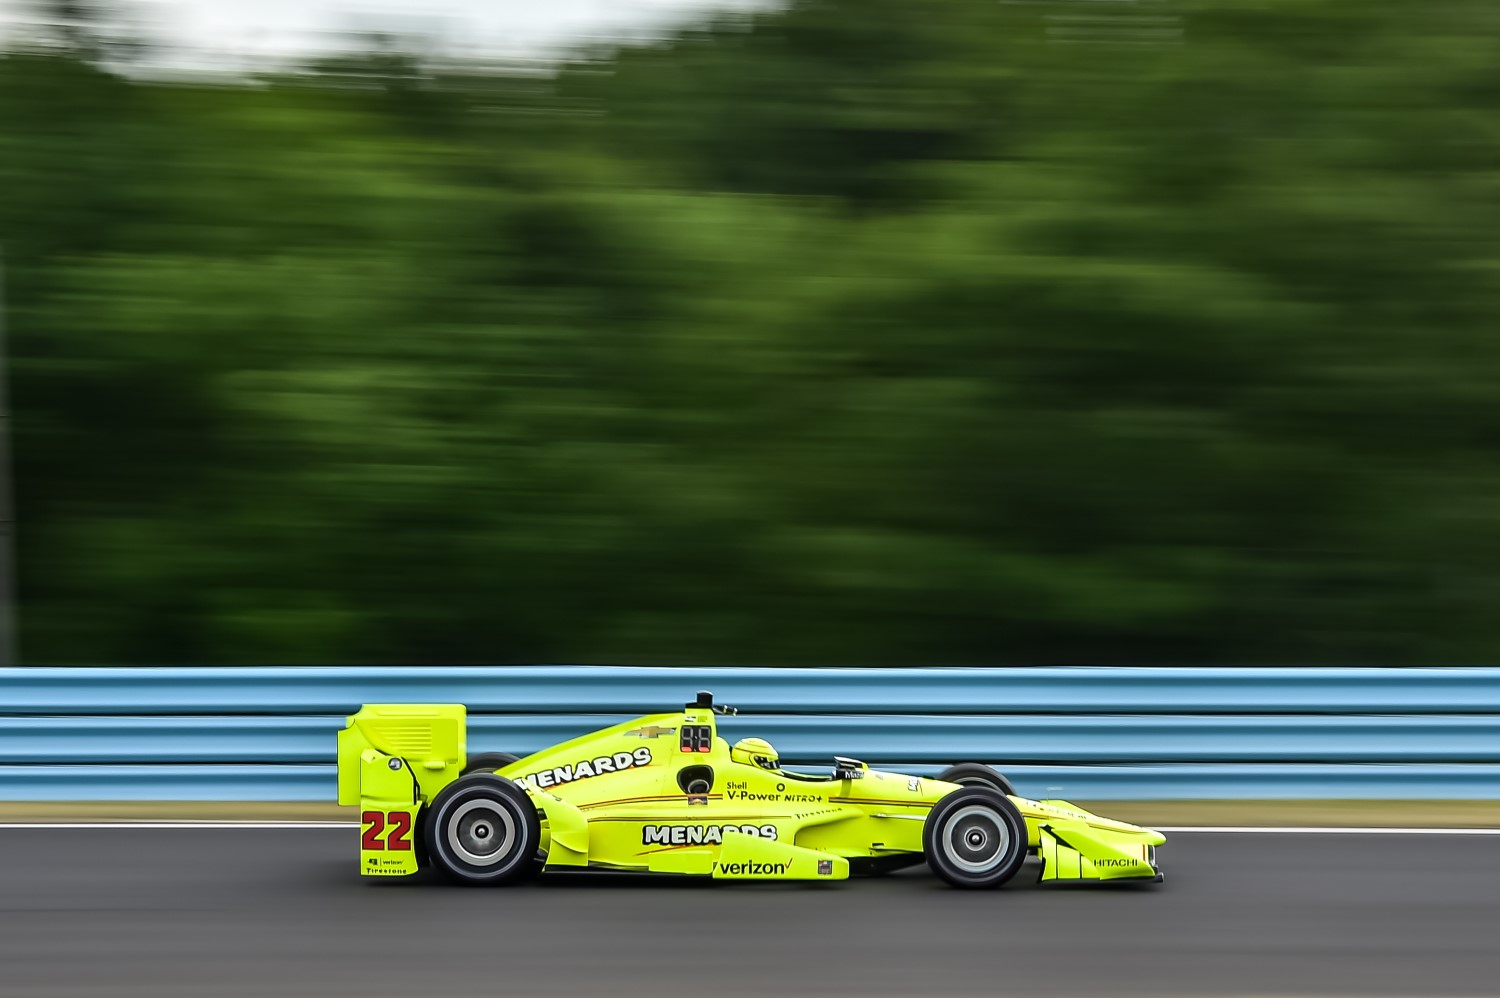 Simon Pagenaud looks to build his championship lead this weekend at Watkins Glen